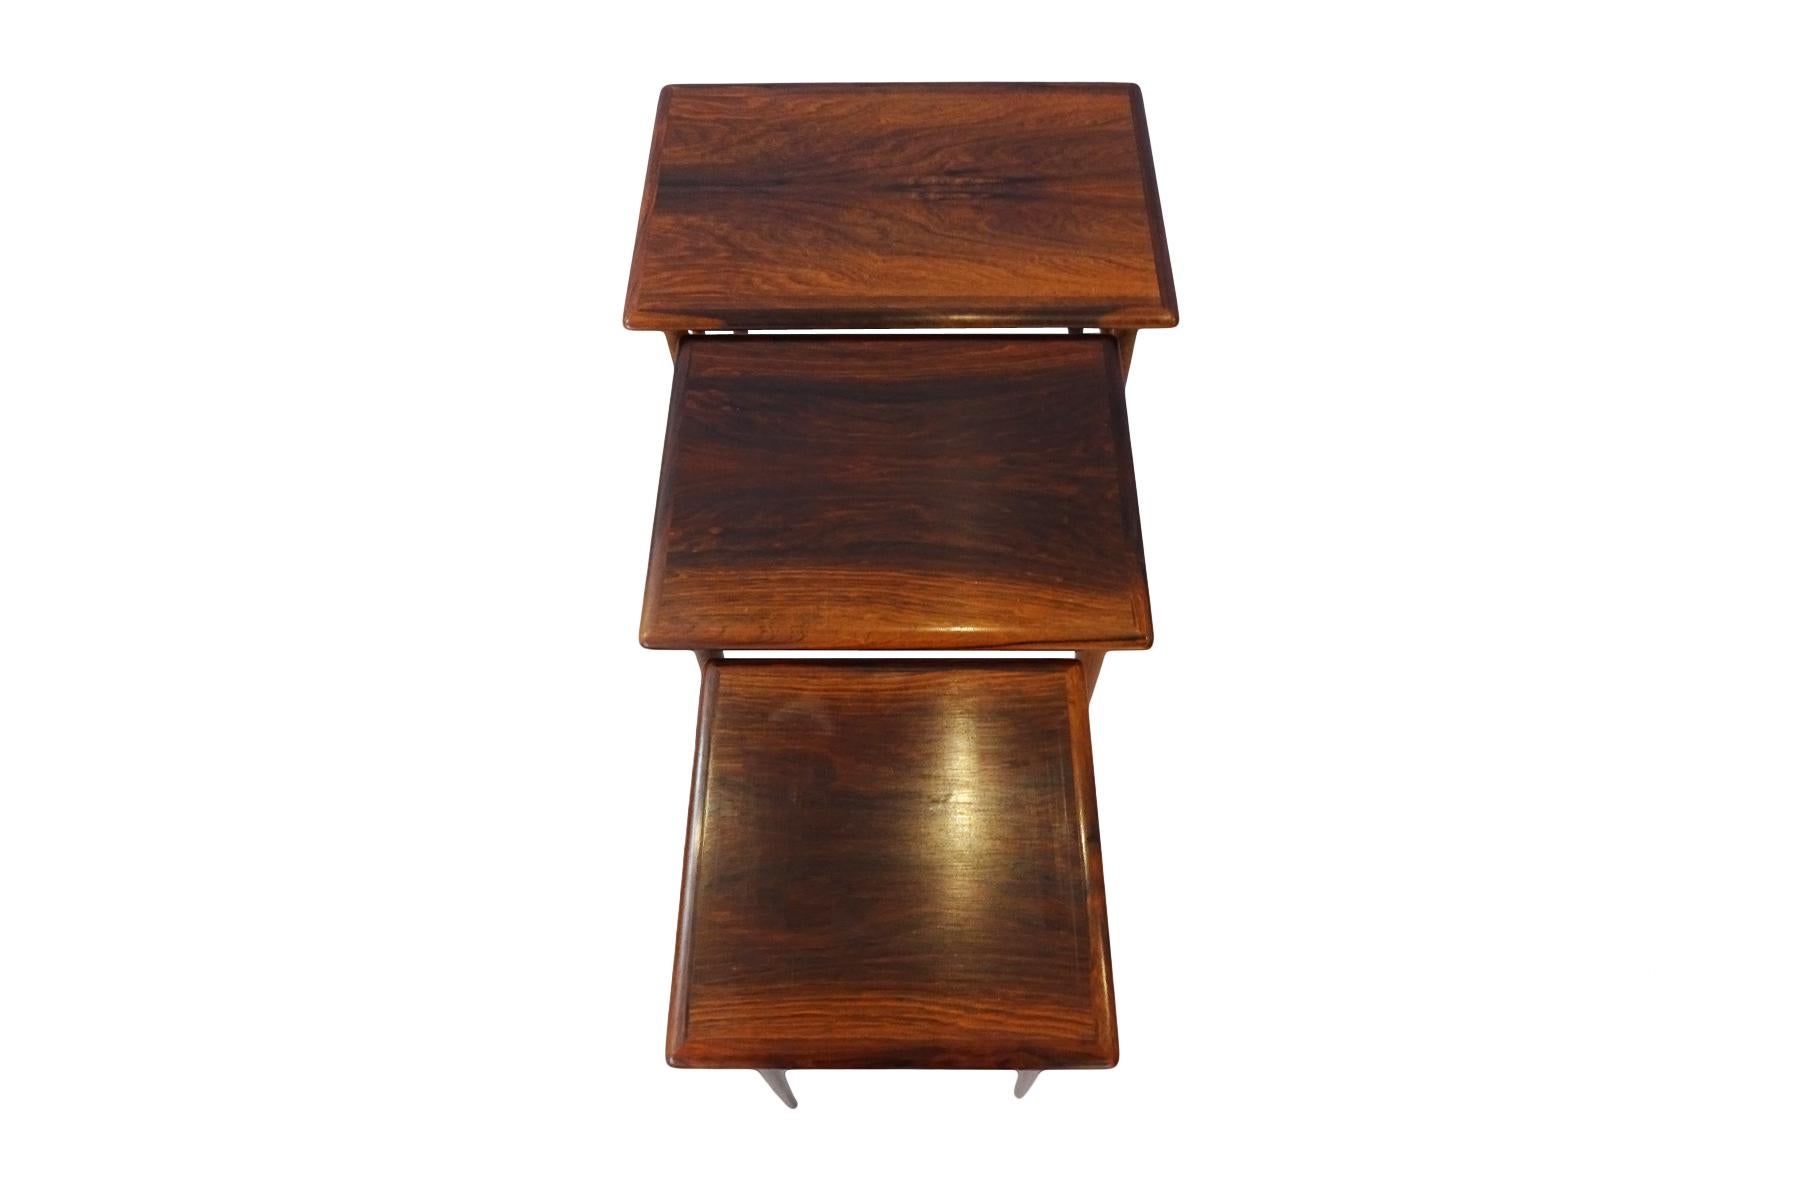 A set of 3 nesting Kai Kristiansen Mid century rosewood coffee tables - circa 1960 - 1969

This set of three rosewood tables were designed by Kai Kristiansen and produced by Skovmand & Andersen circa 1960 - 1969. The tables are made of solid